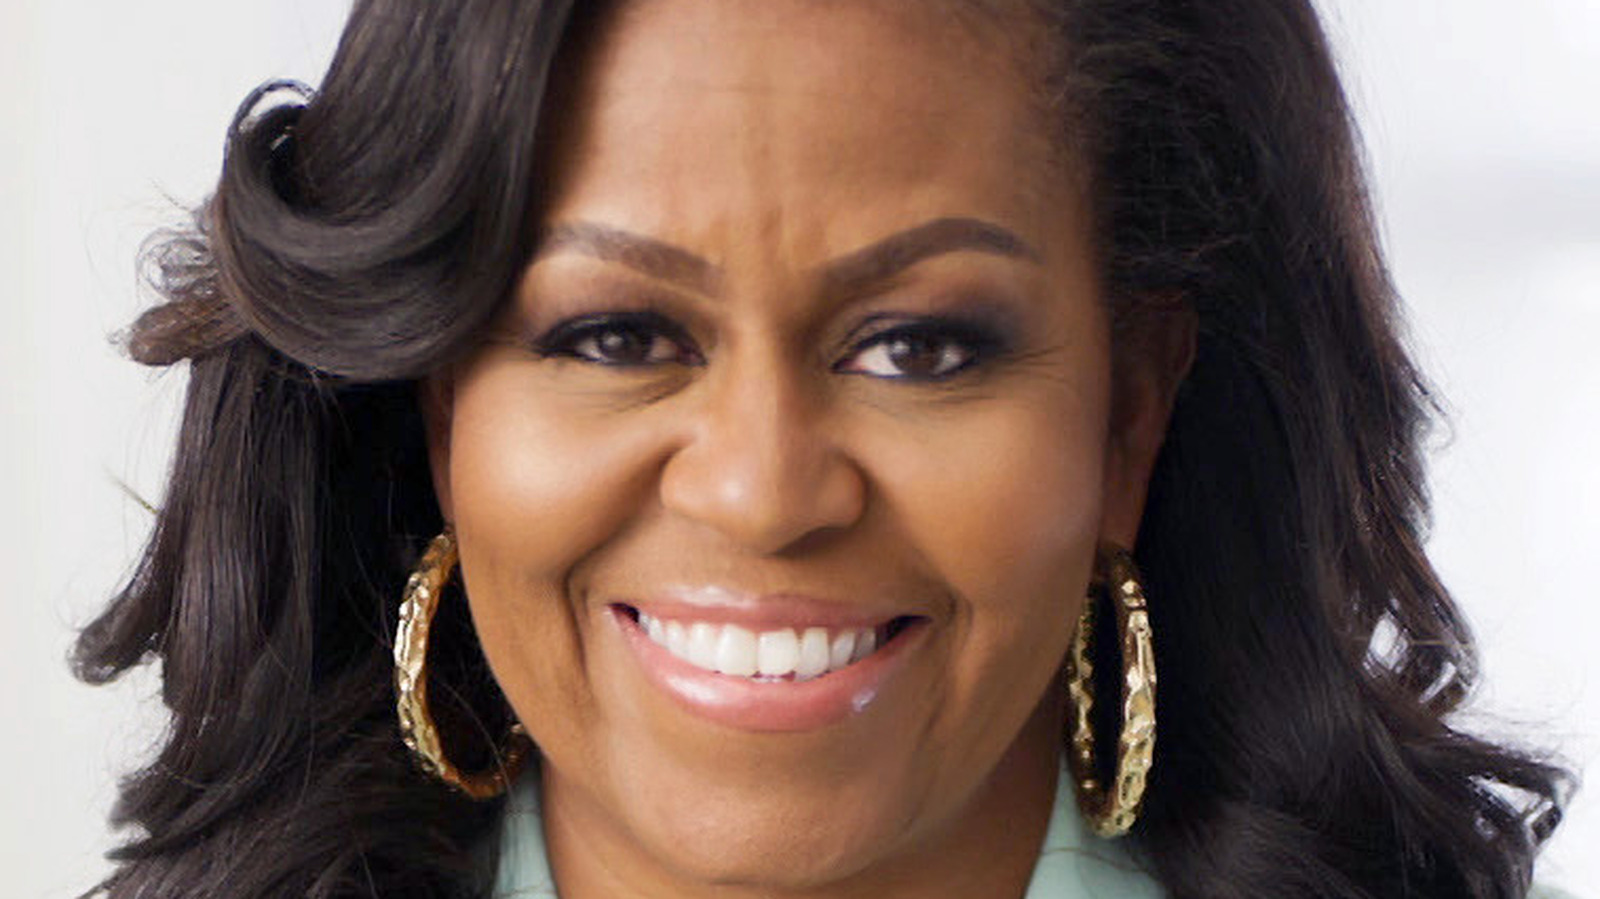 Michelle Obama’s Parenting Advice Is What Every Tired Mom Needs To Hear